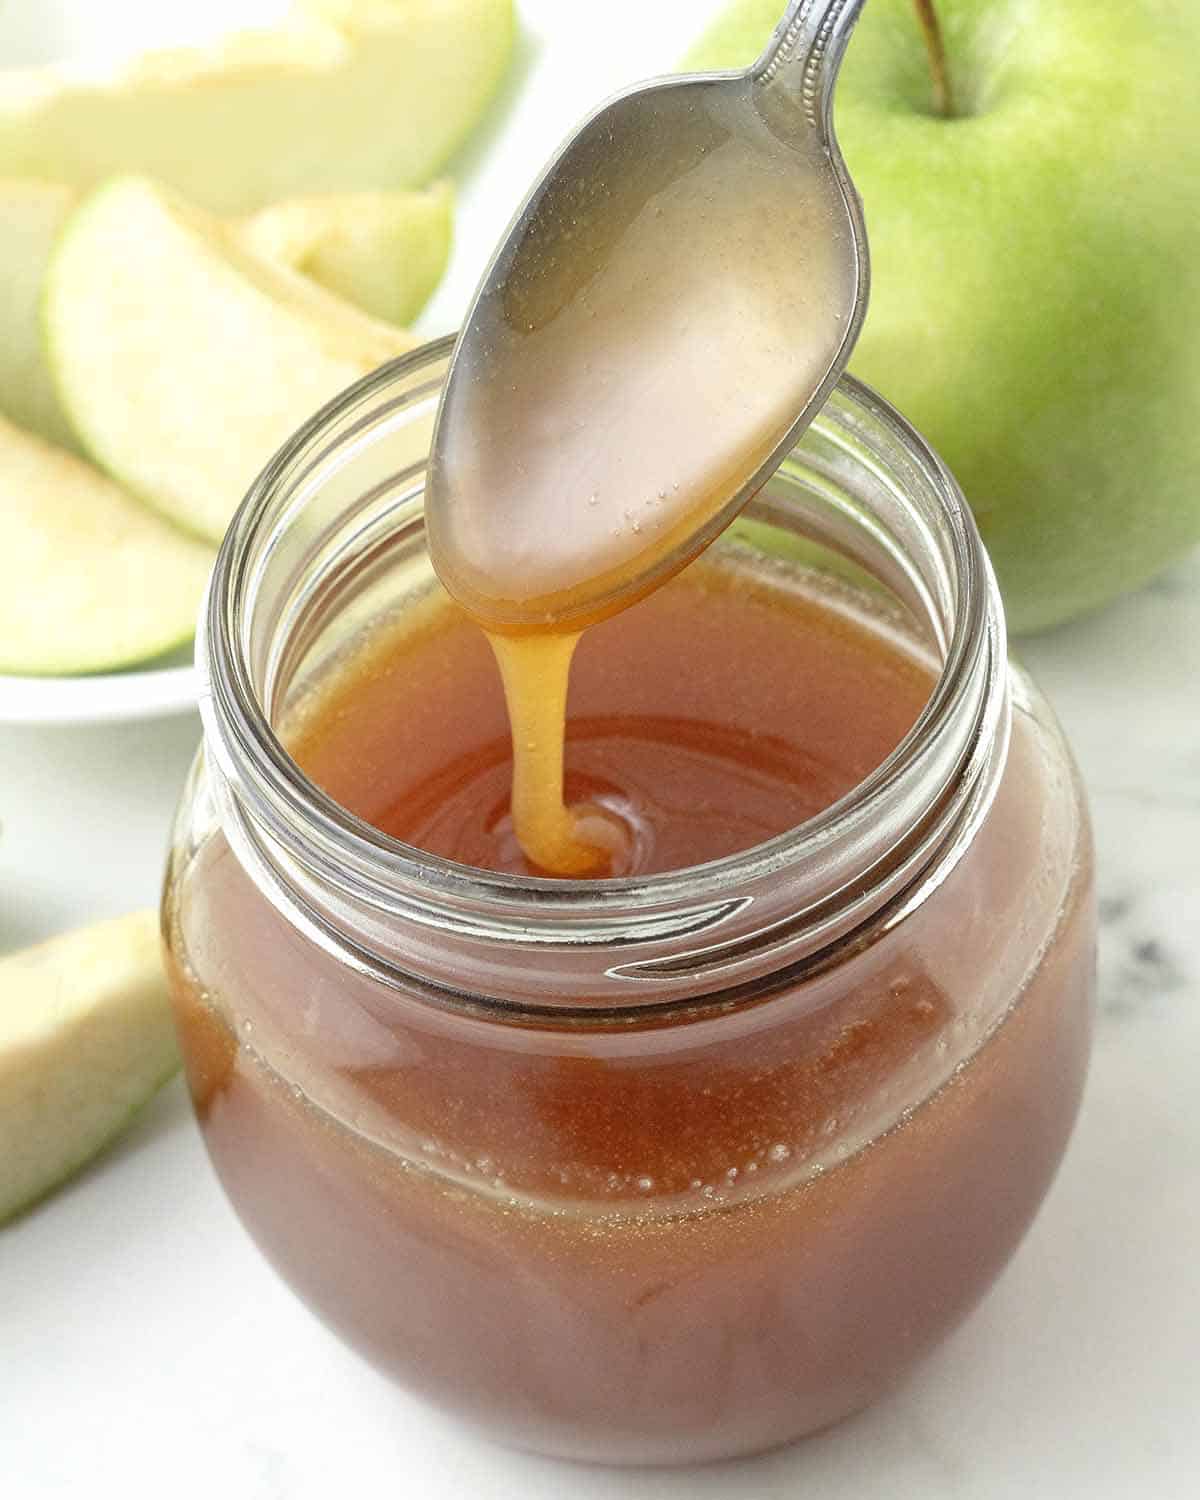 A spoon dripping with creamy vegan maple caramel sauce after being dipped into a jar of the sauce.